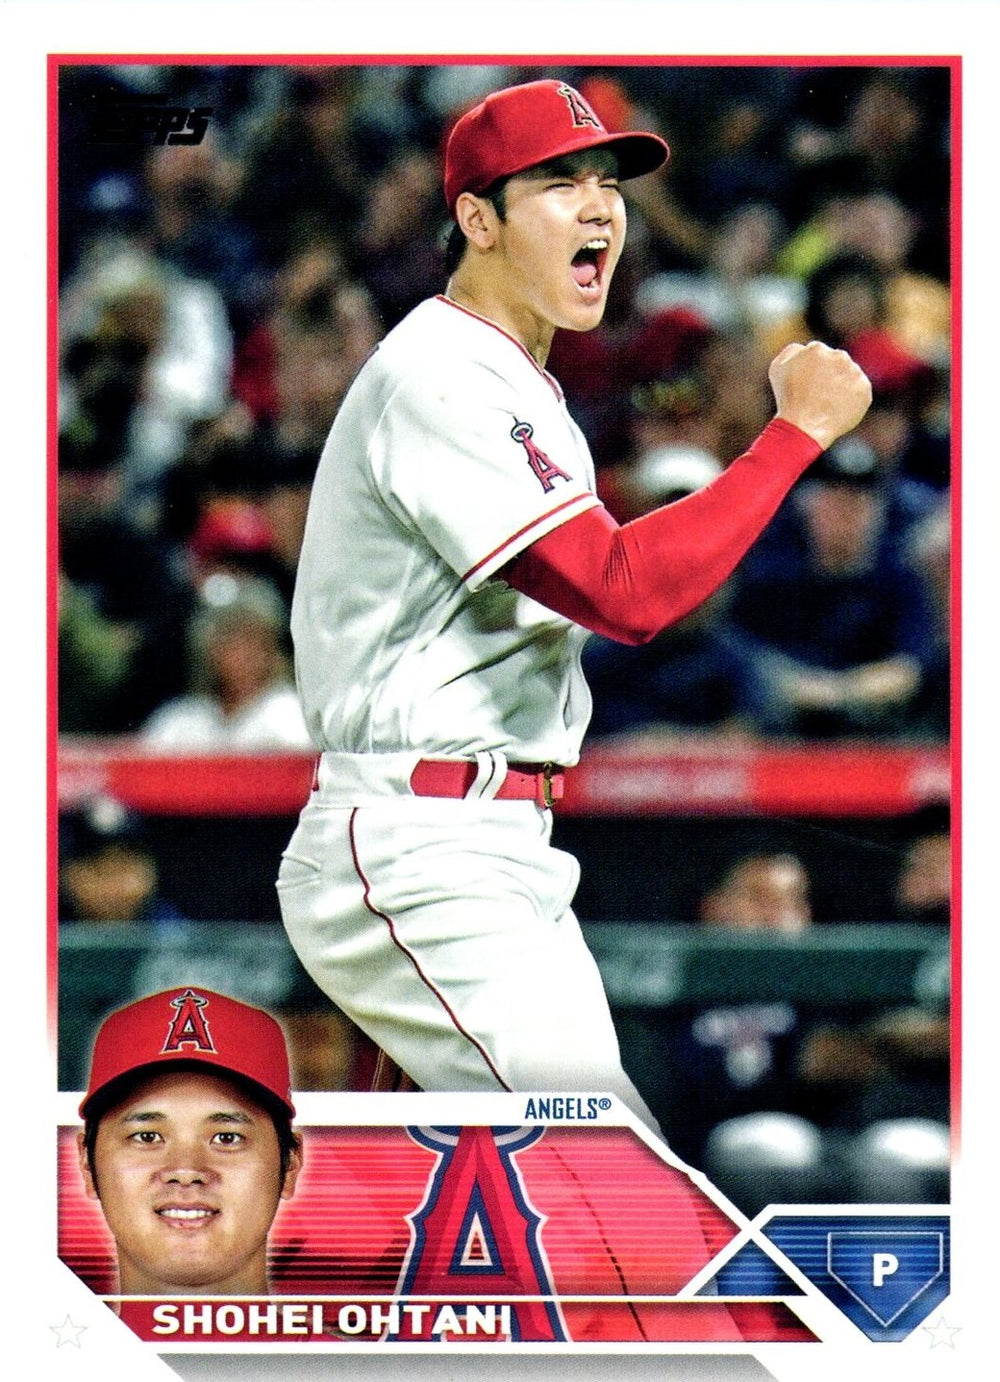 Shohei Ohtani 2023 Topps Baseball Series Mint Card #17 picturing him in his White Los Angeles Angels Jersey